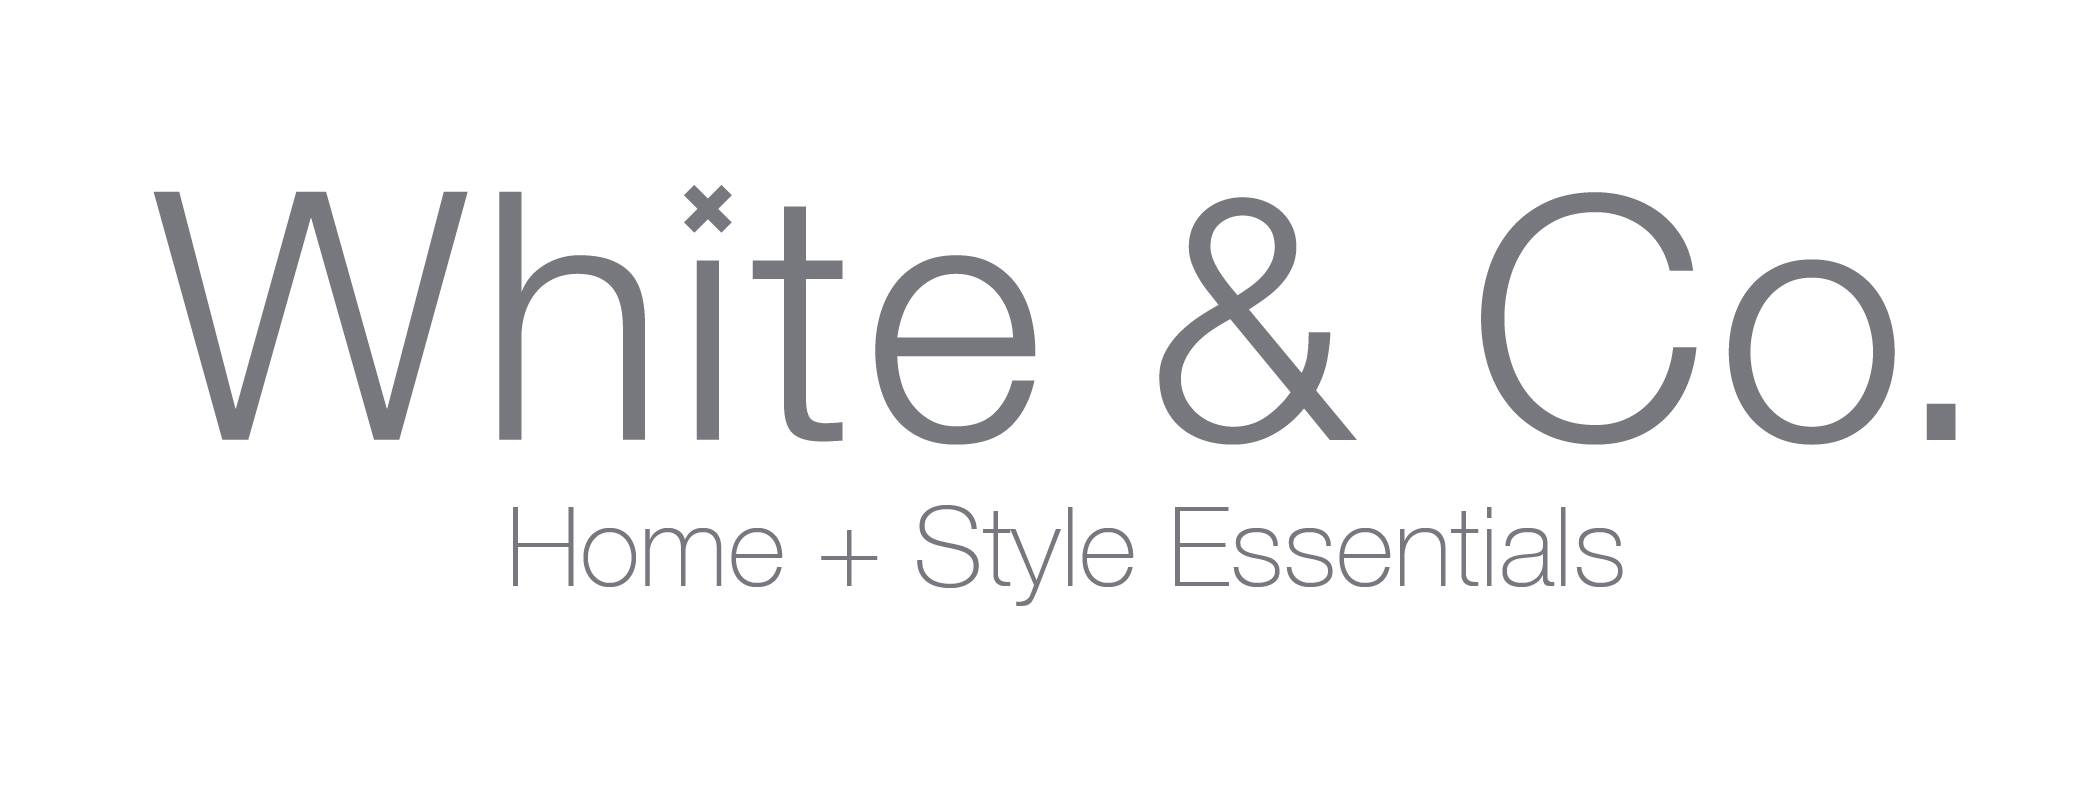 All White & Co. Deals & Promotions